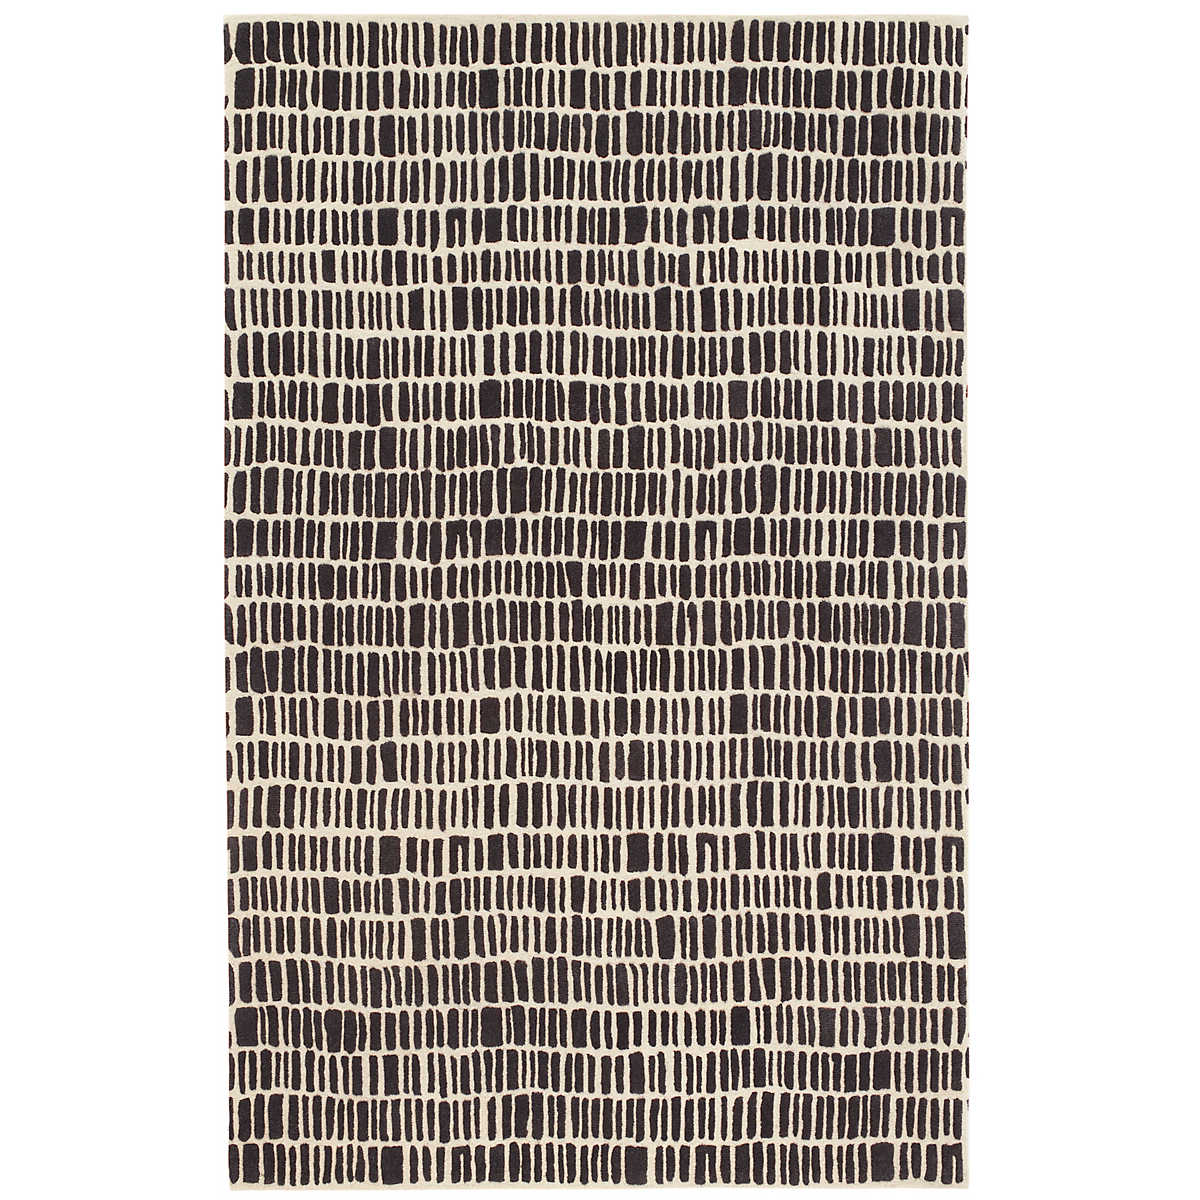 The Roark Charcoal Rug design of this luxurious, plush wool rug conjures surfaces of ancient hand-laid rock walls. The contrast between stone and mortar is further represented by the meticulously tufted high and low levels of the velvety hand-sheared pile. Amethyst Home provides interior design services, furniture, rugs, and lighting in the Kansas City metro area.